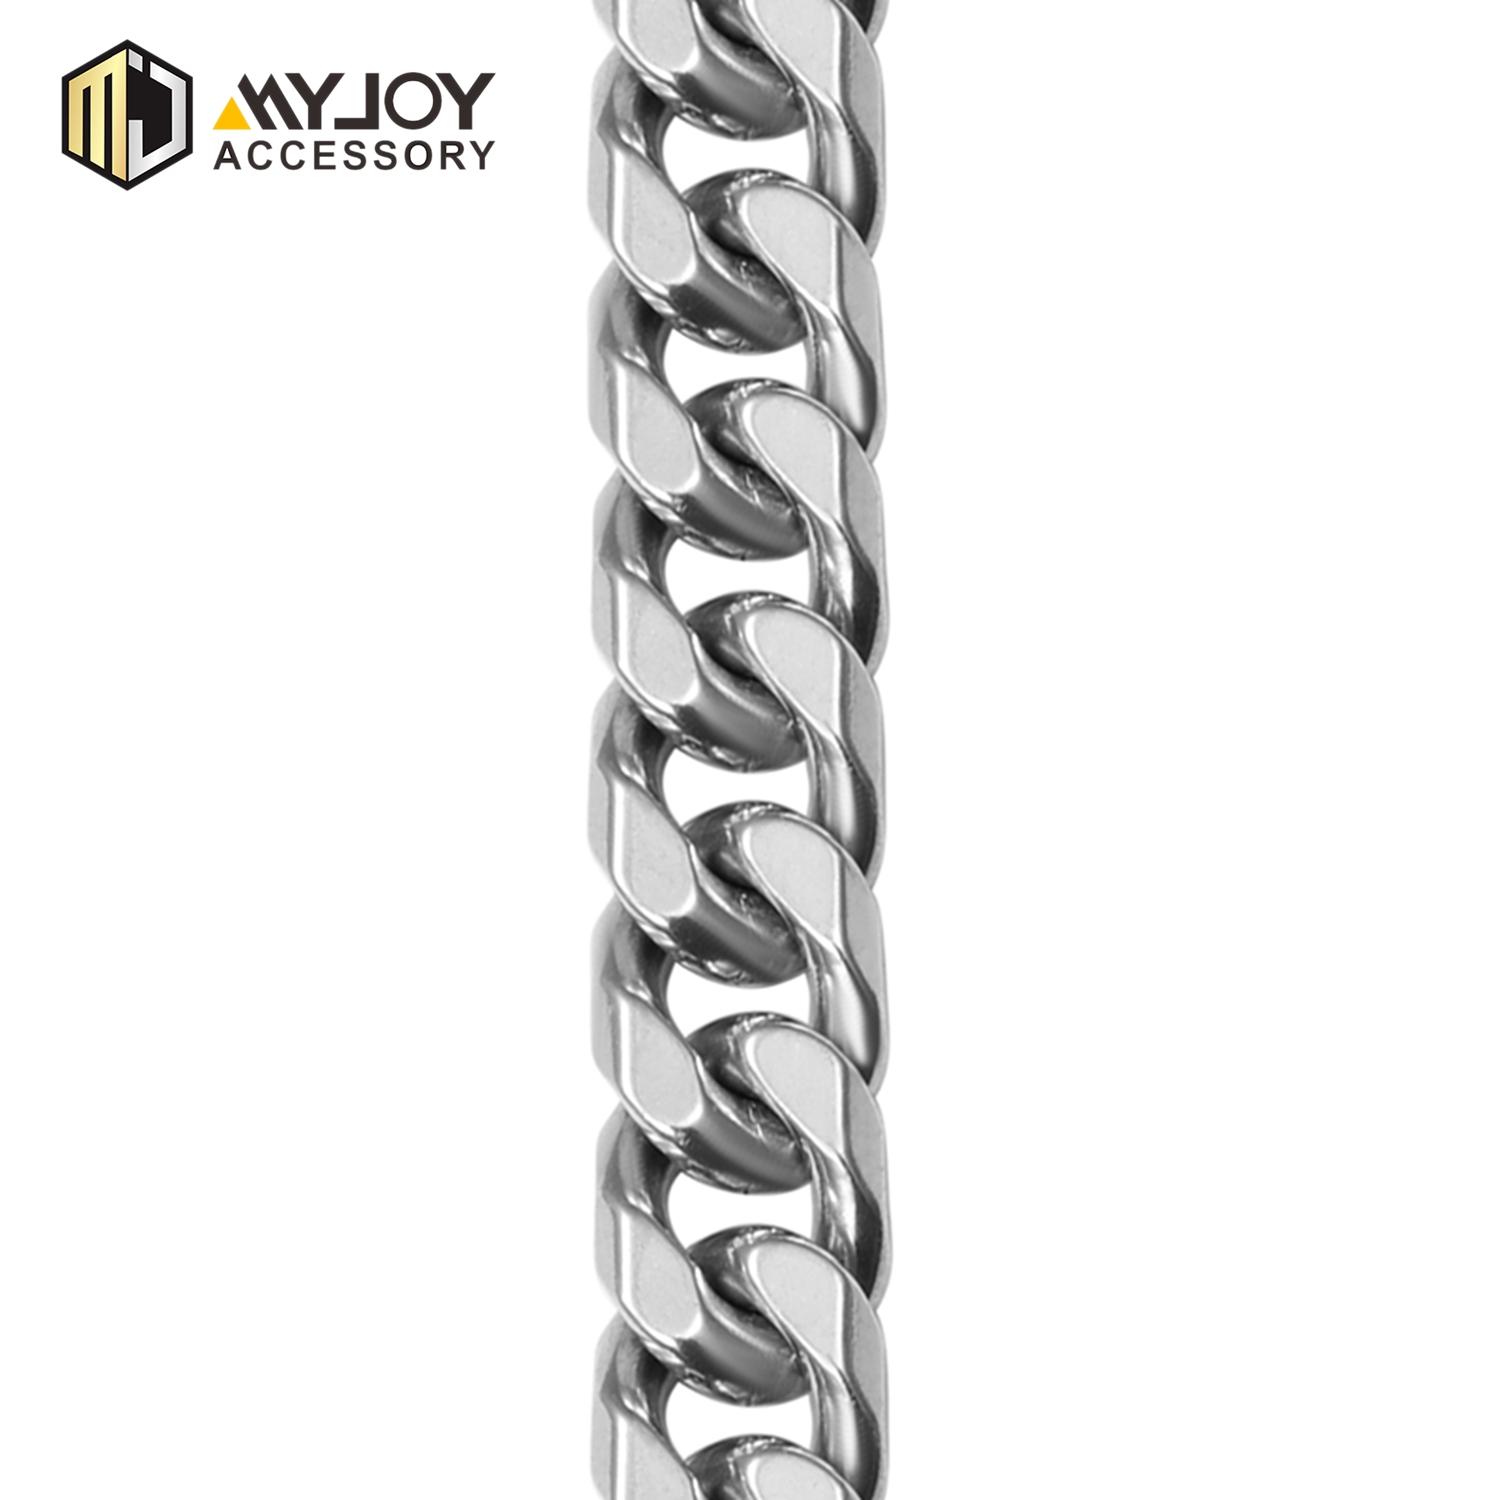 MYJOY zinc chain strap Suppliers for purses